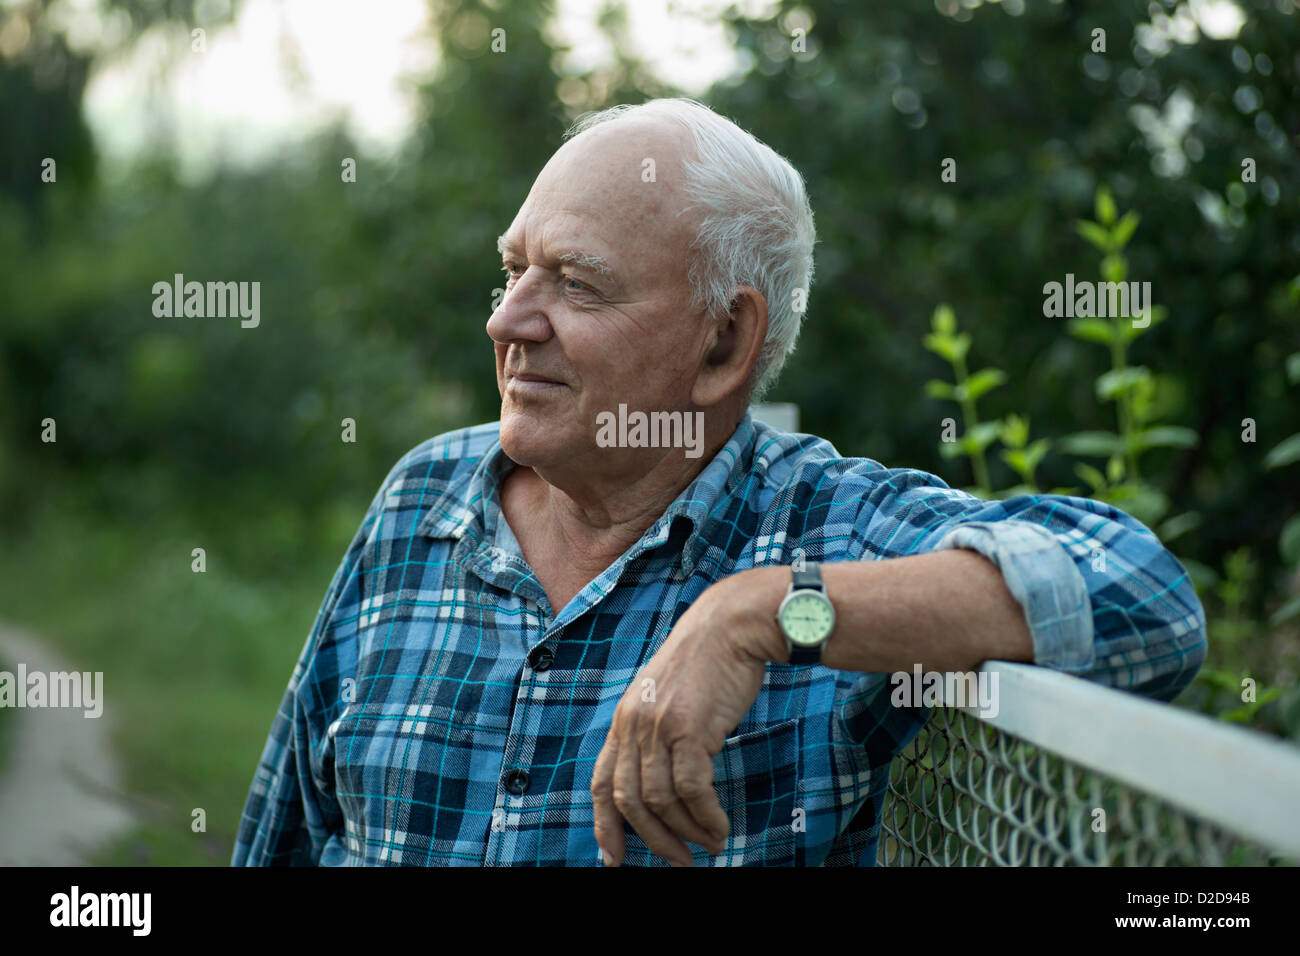 A senior man leaning on a fence and looking away serenely Stock Photo